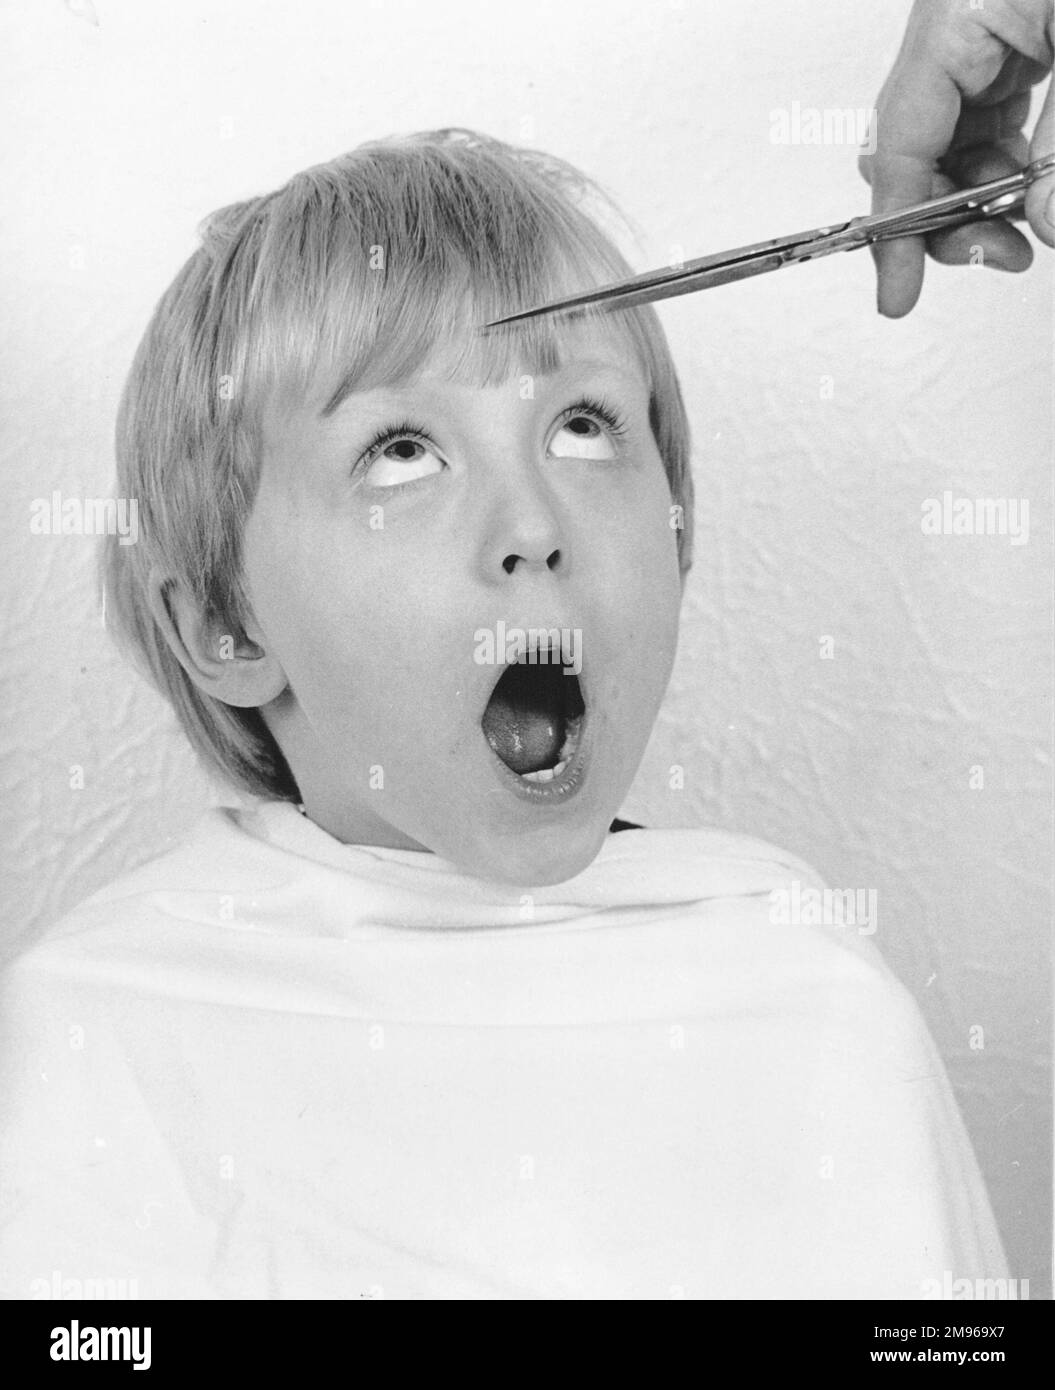 A young boy having a haircut.  He looks up in mock horror as the scissors begin to cut across his nice blond fringe. Stock Photo